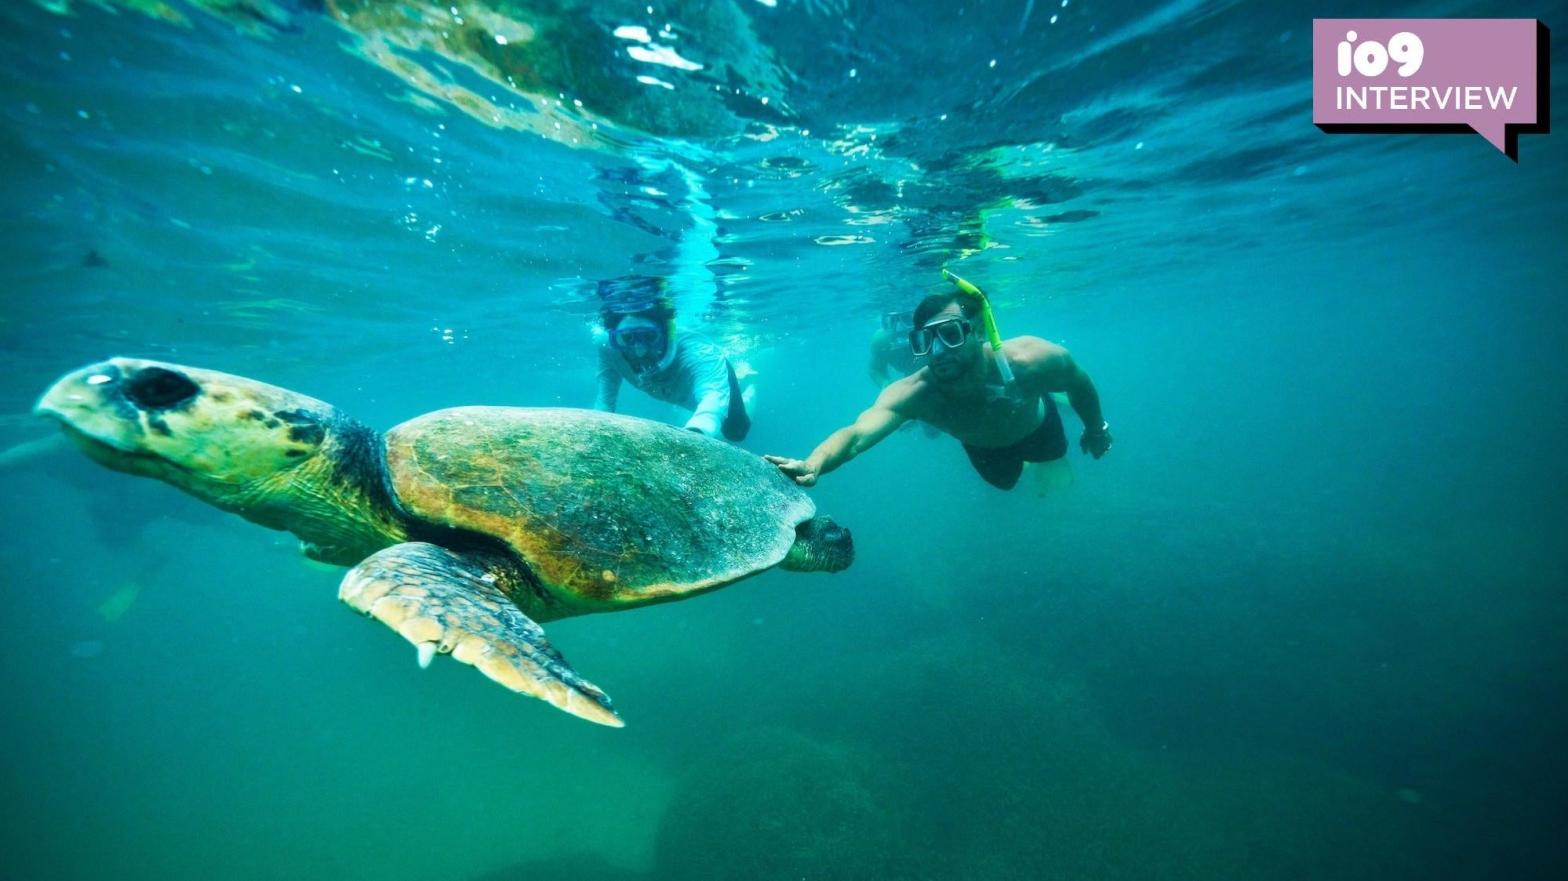 Professional freediver Tanya Streeter and Marvel star Chris Hemsworth swim with a turtle. (Image: National Geographic for Disney+/Craig Perry)